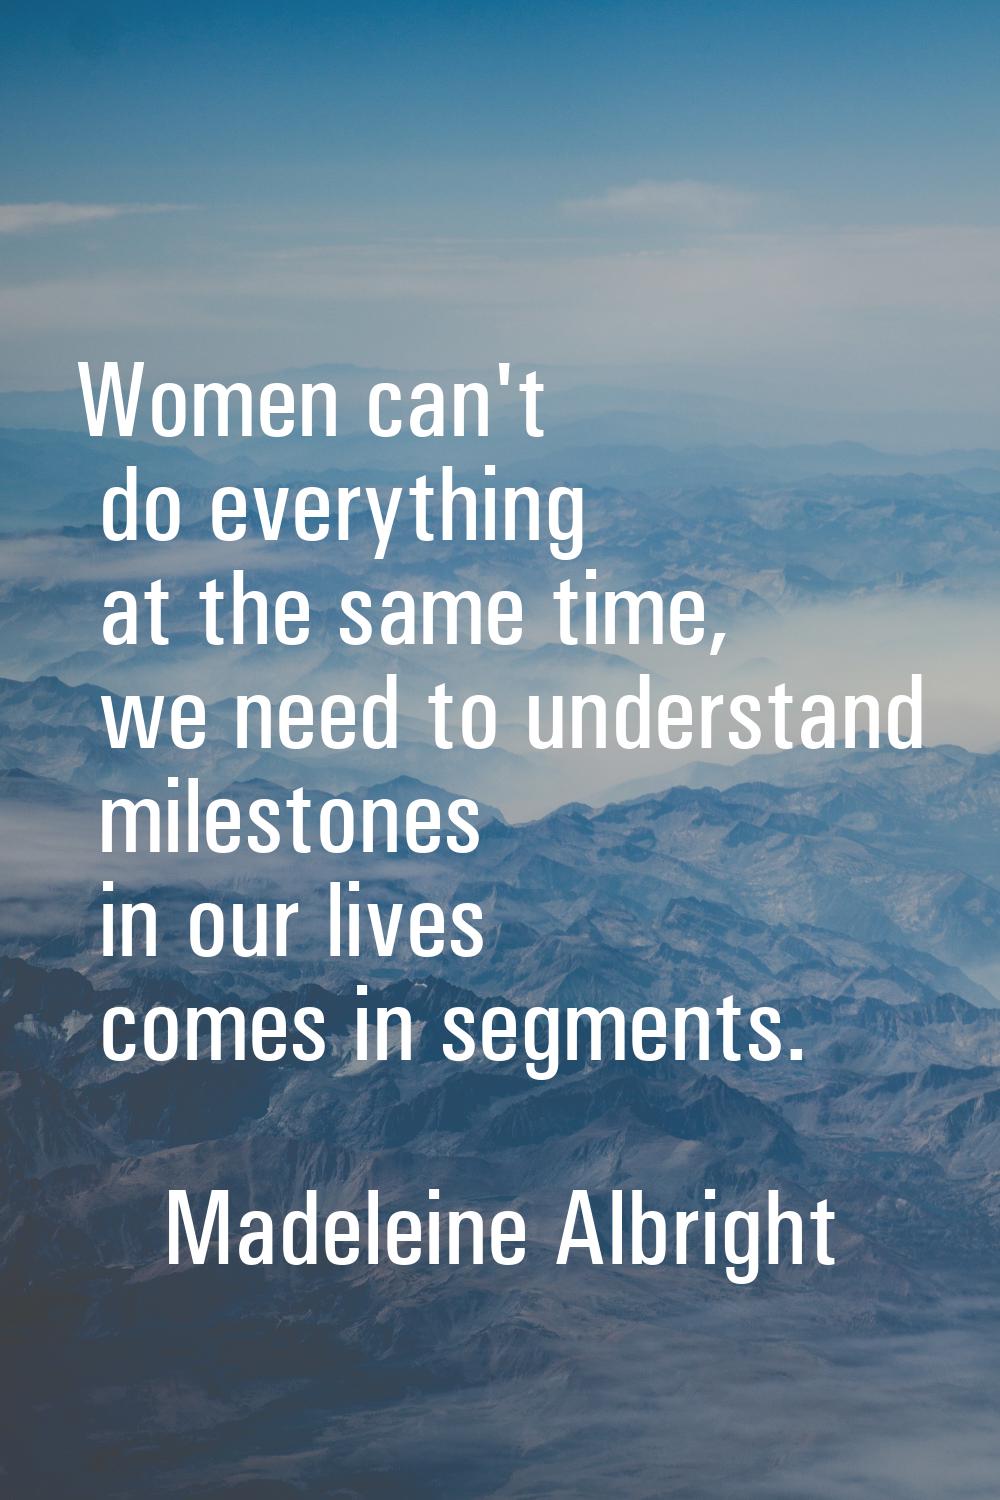 Women can't do everything at the same time, we need to understand milestones in our lives comes in 